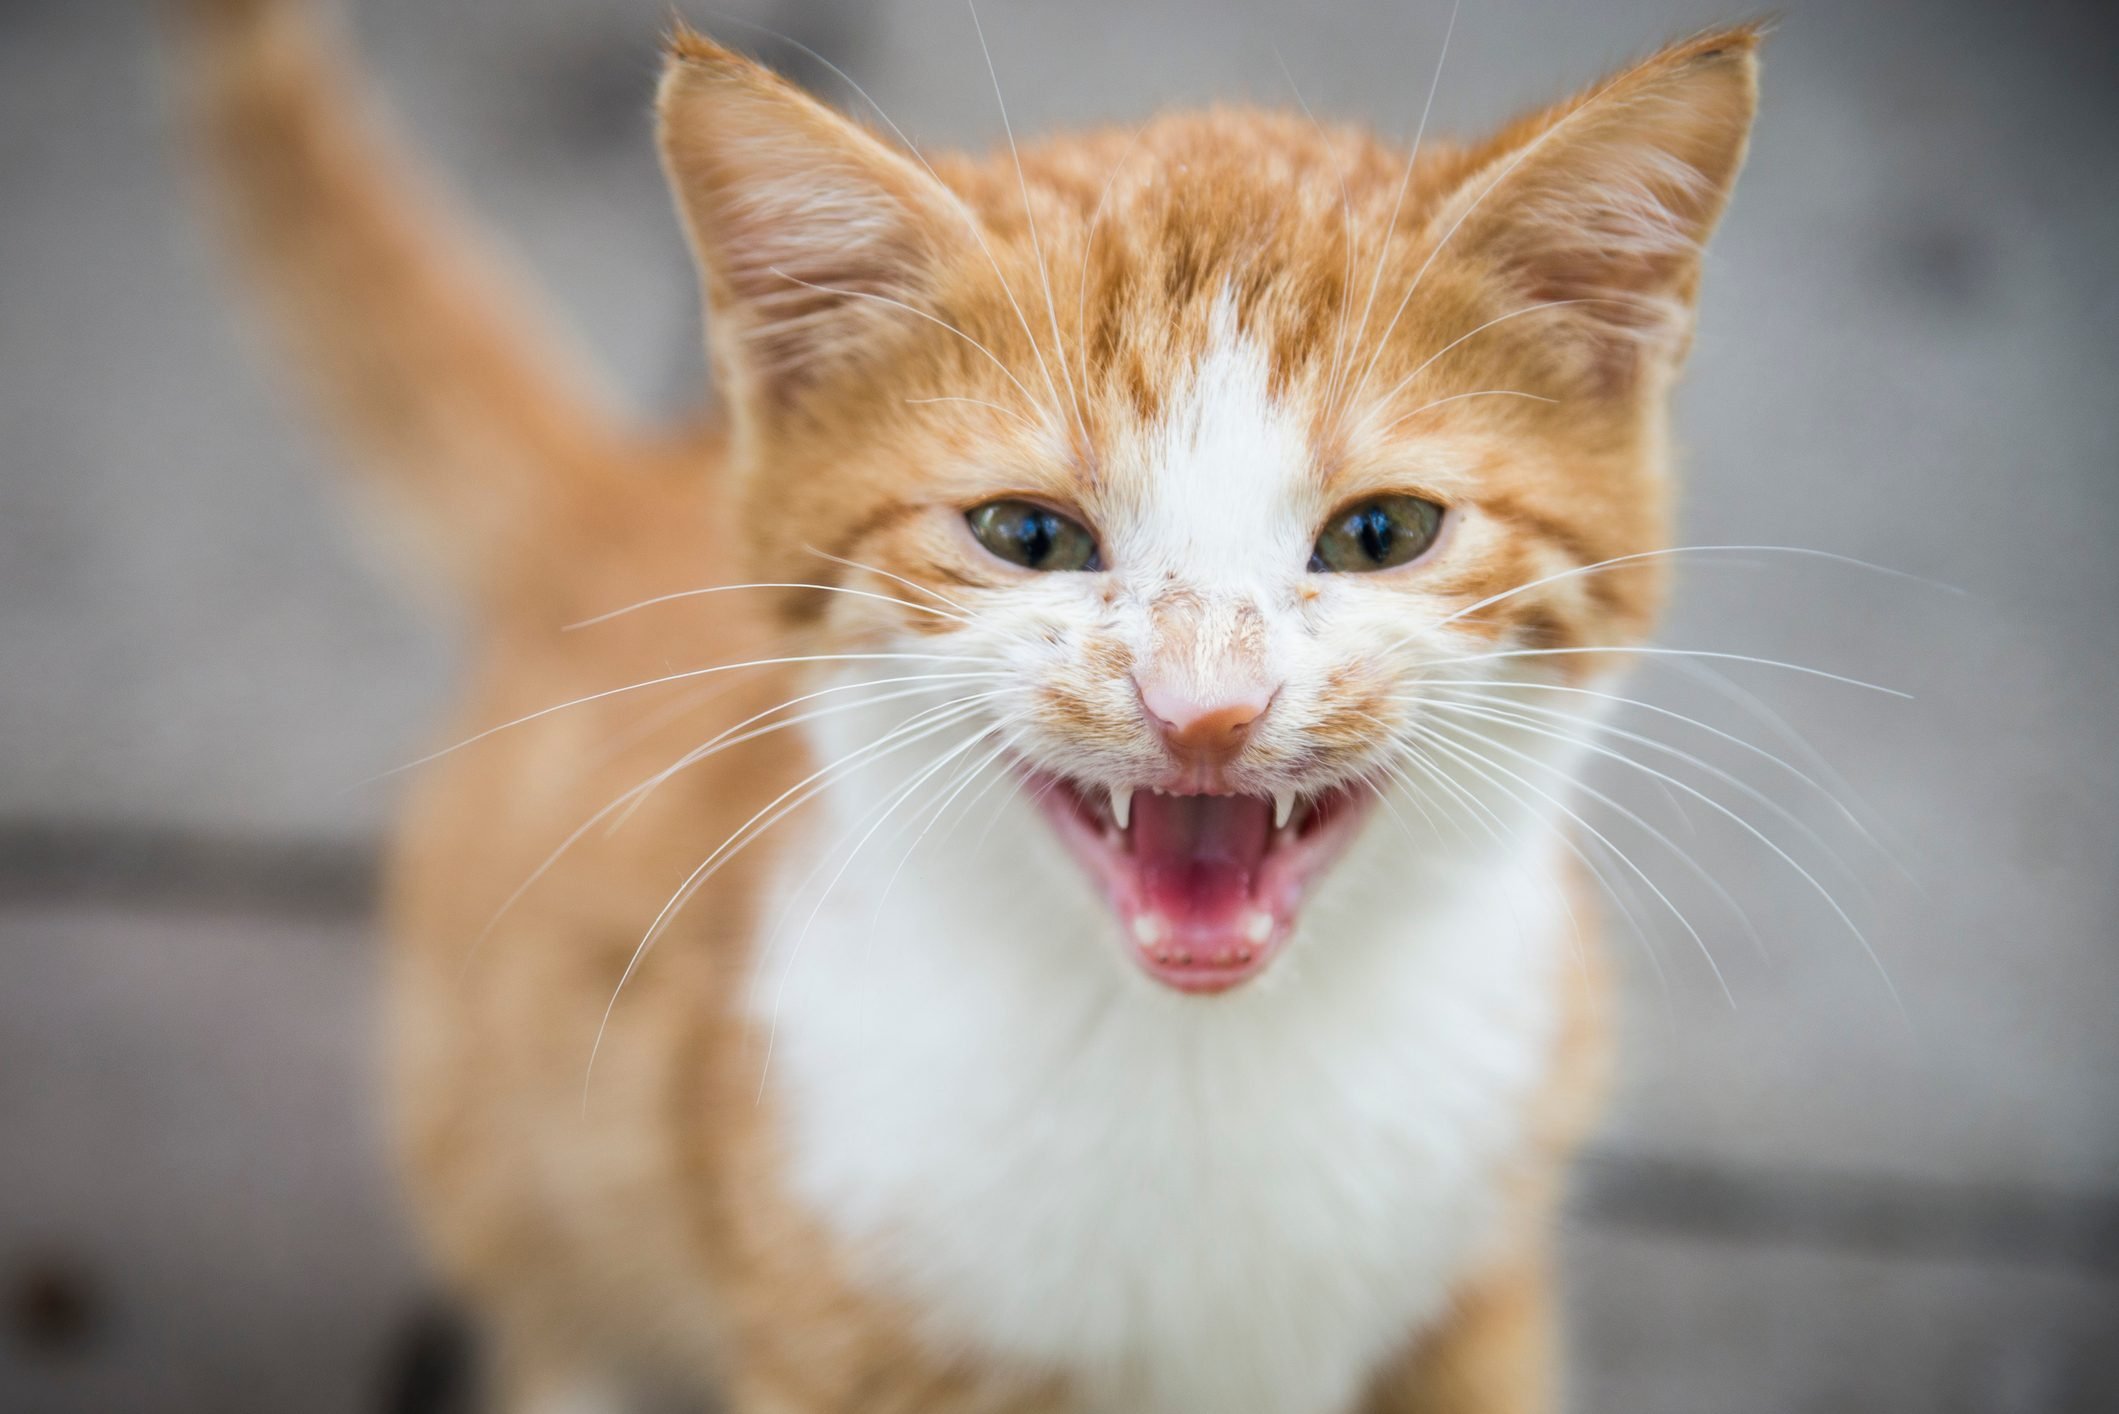 5 Common Cat Noises and What They Mean - All About Cats